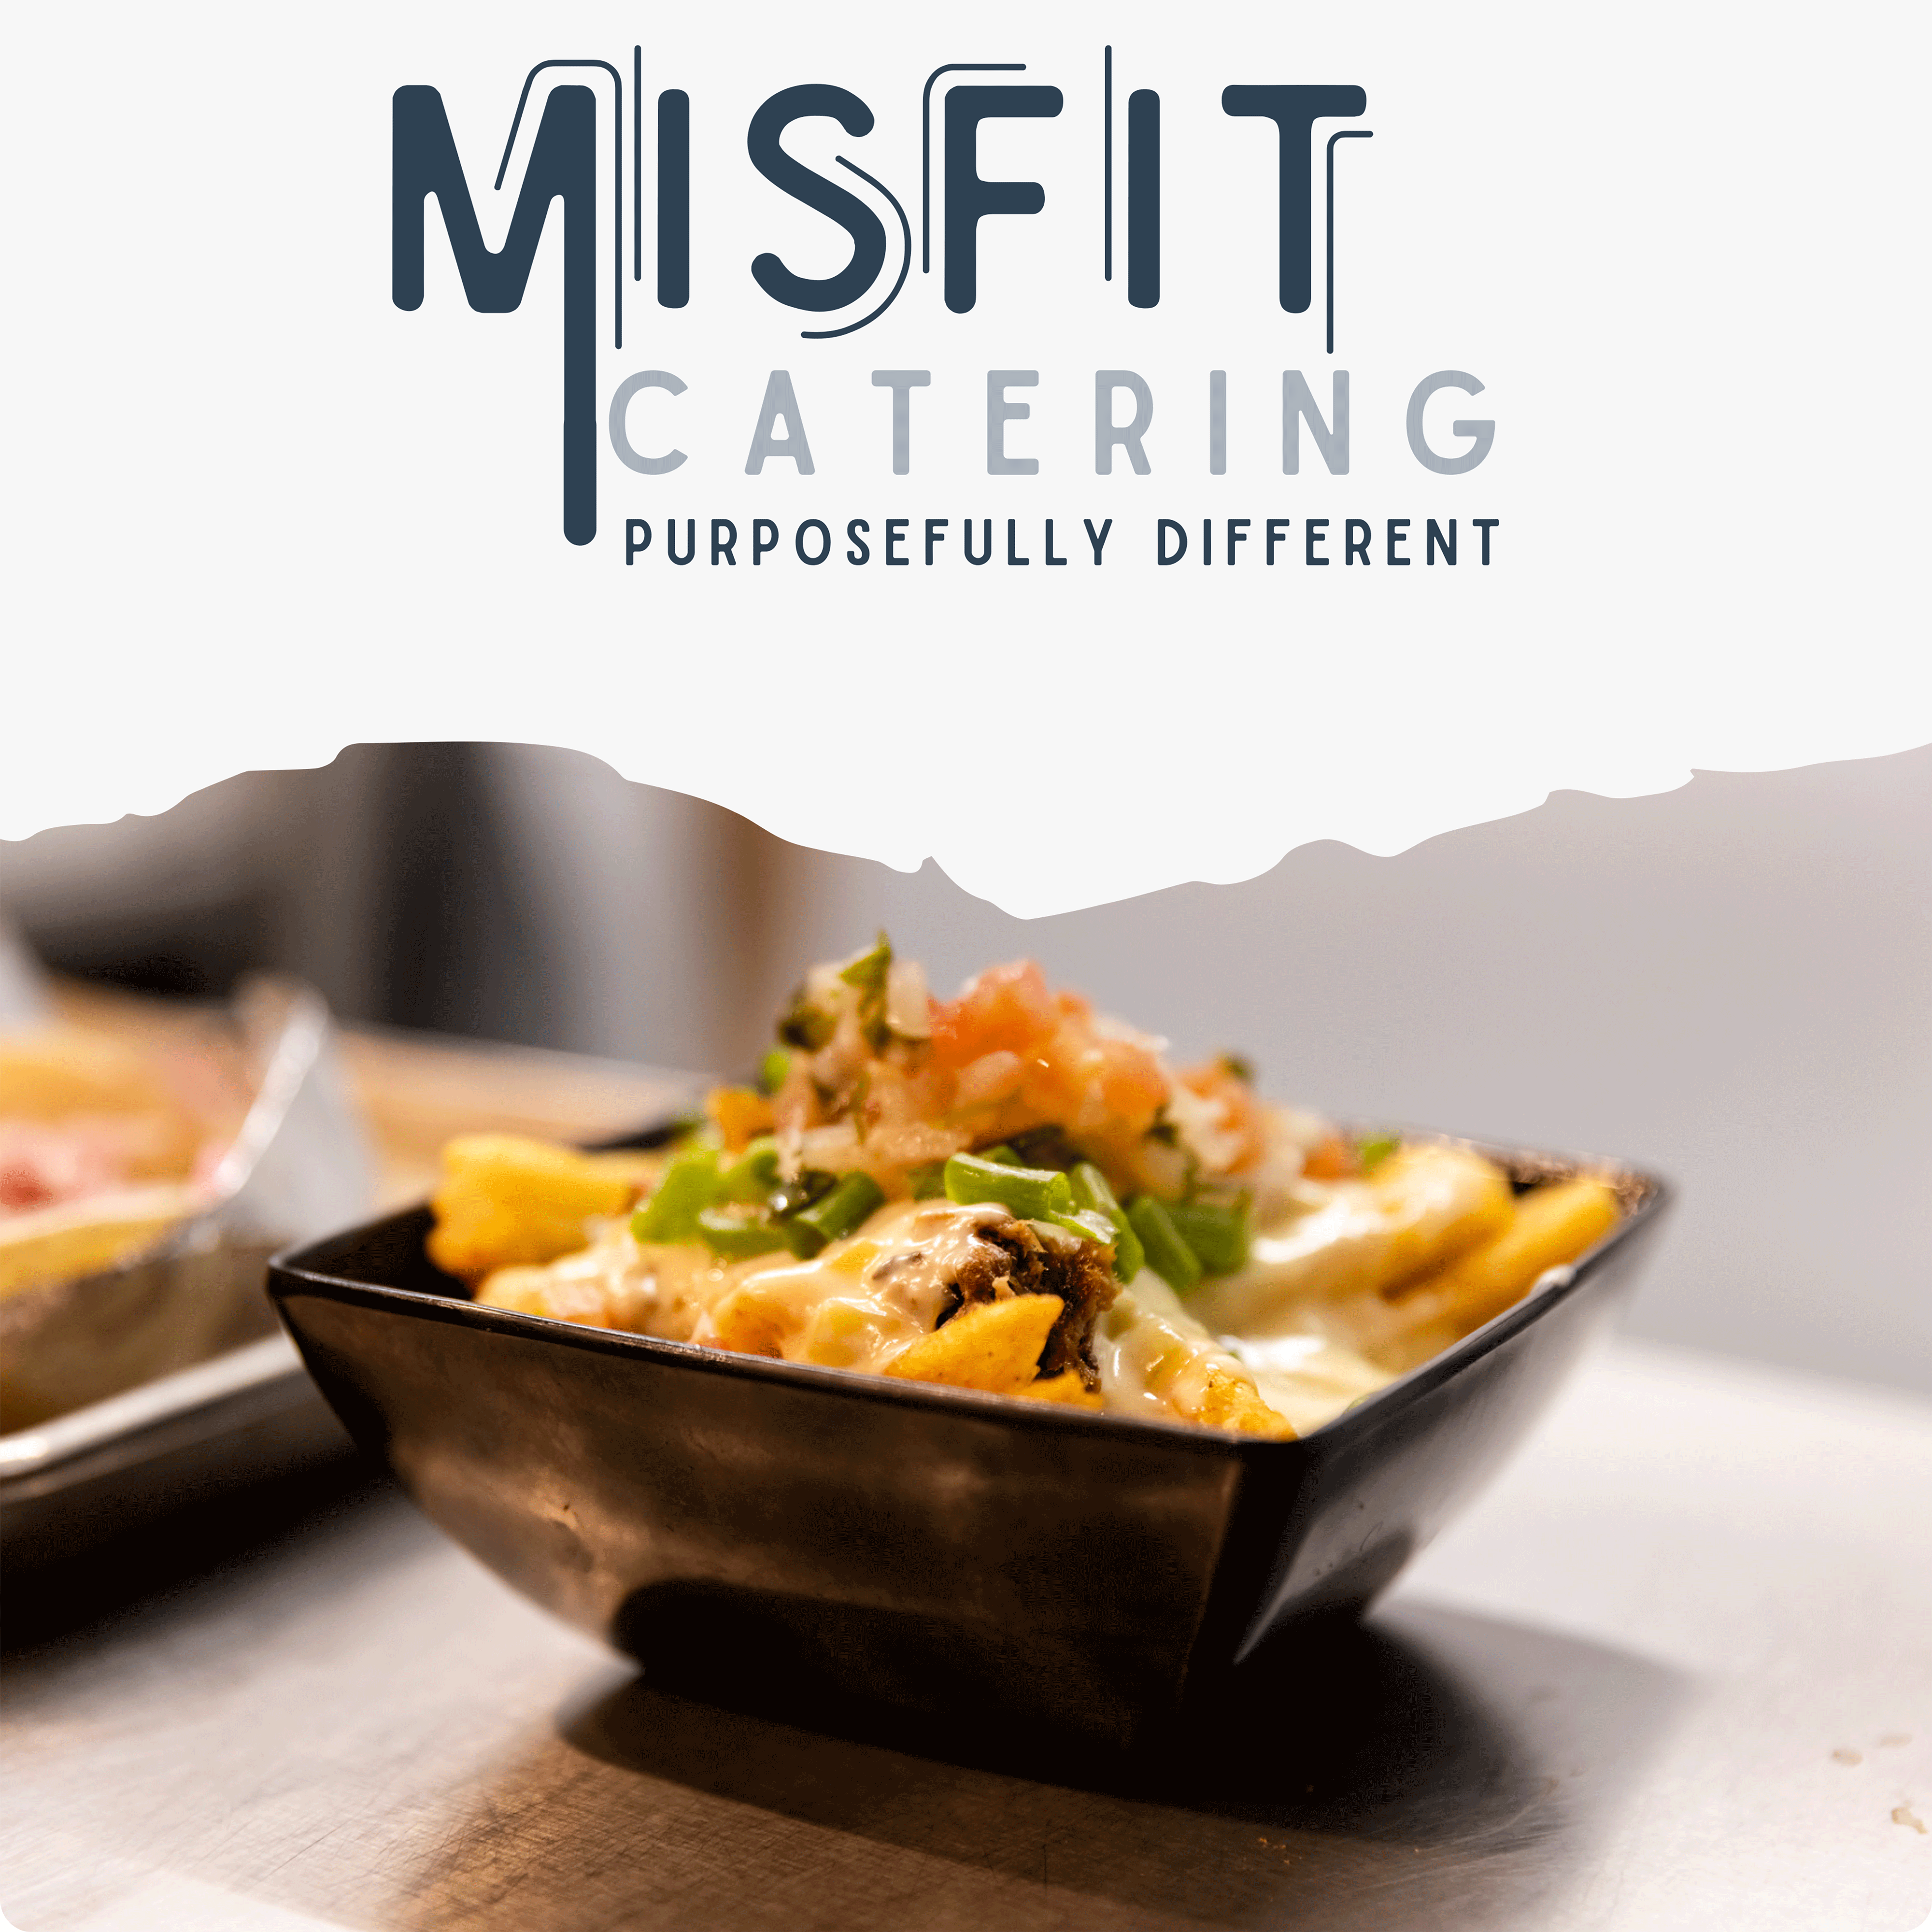 Misfit-Catering-021523-1